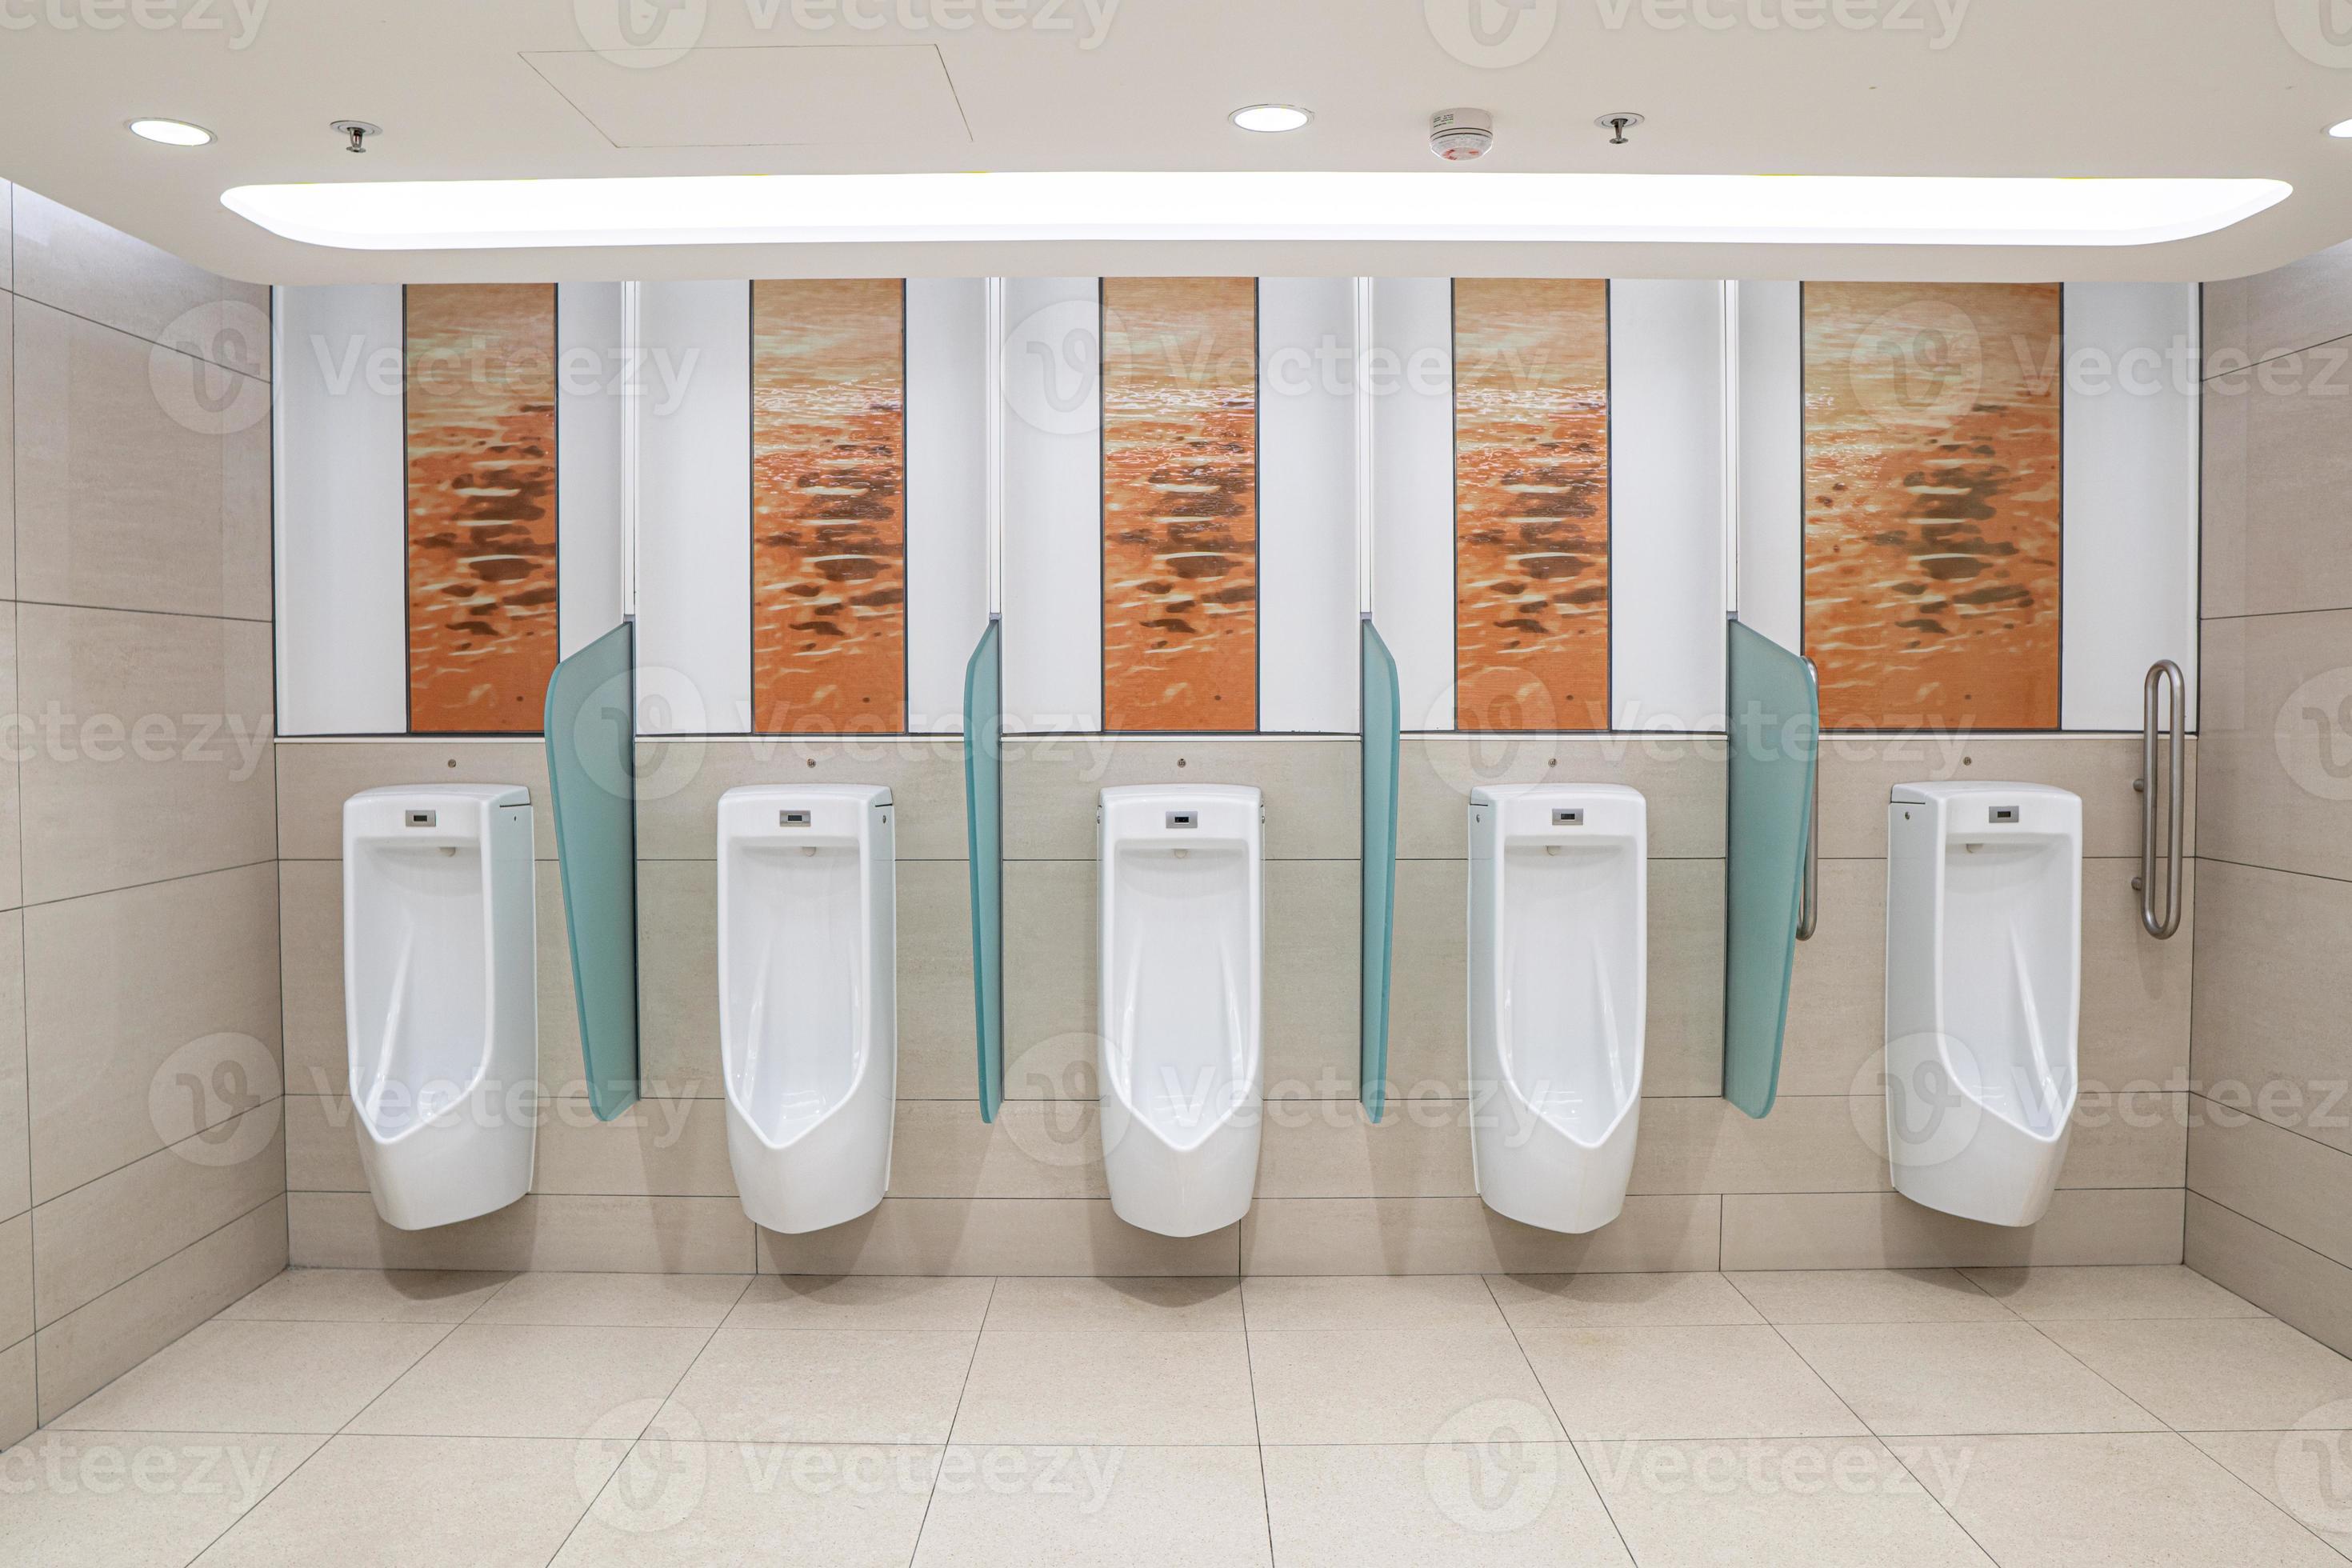 https://static.vecteezy.com/system/resources/previews/008/727/703/large_2x/urinals-men-on-wall-public-toilet-photo.jpg